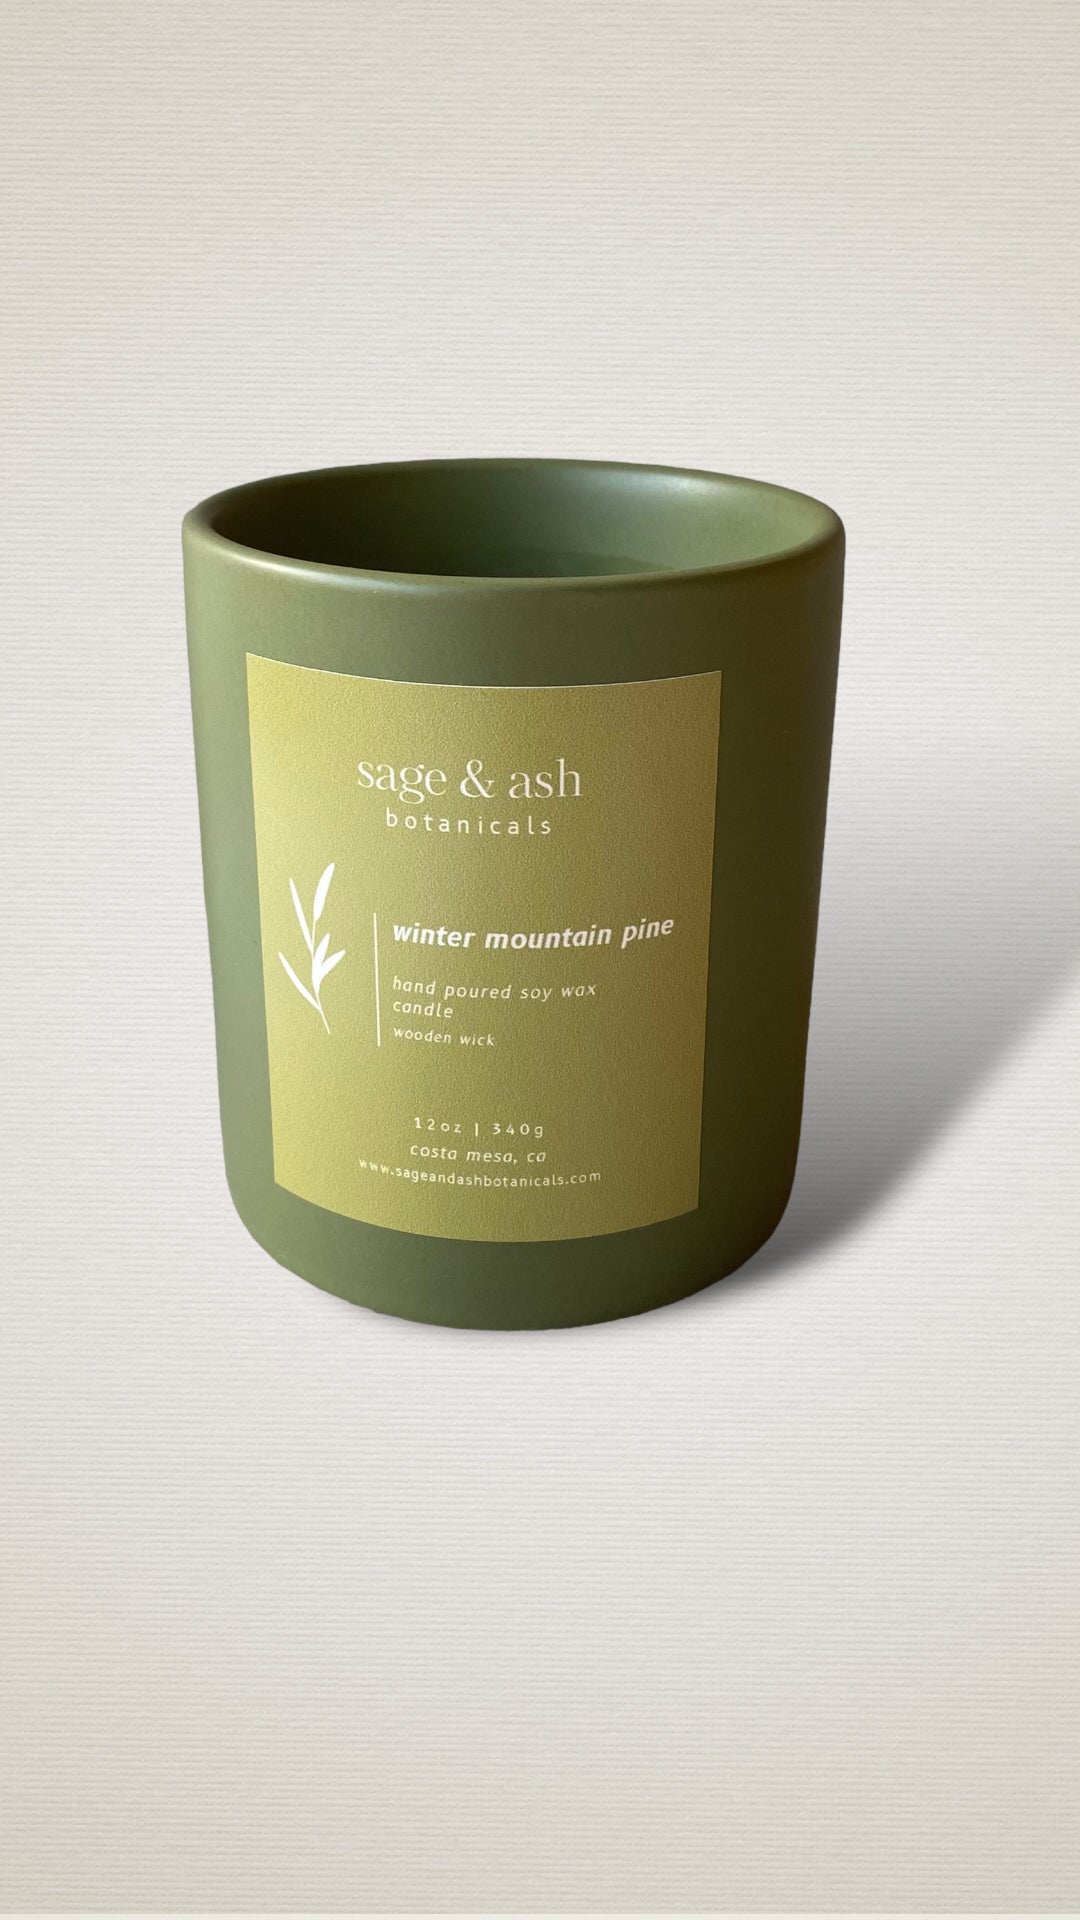 Winter Mountain Pine 12oz Ceramic Tumbler Candle Soy Wax Classic Colle –  sage & ash botanicals candle co